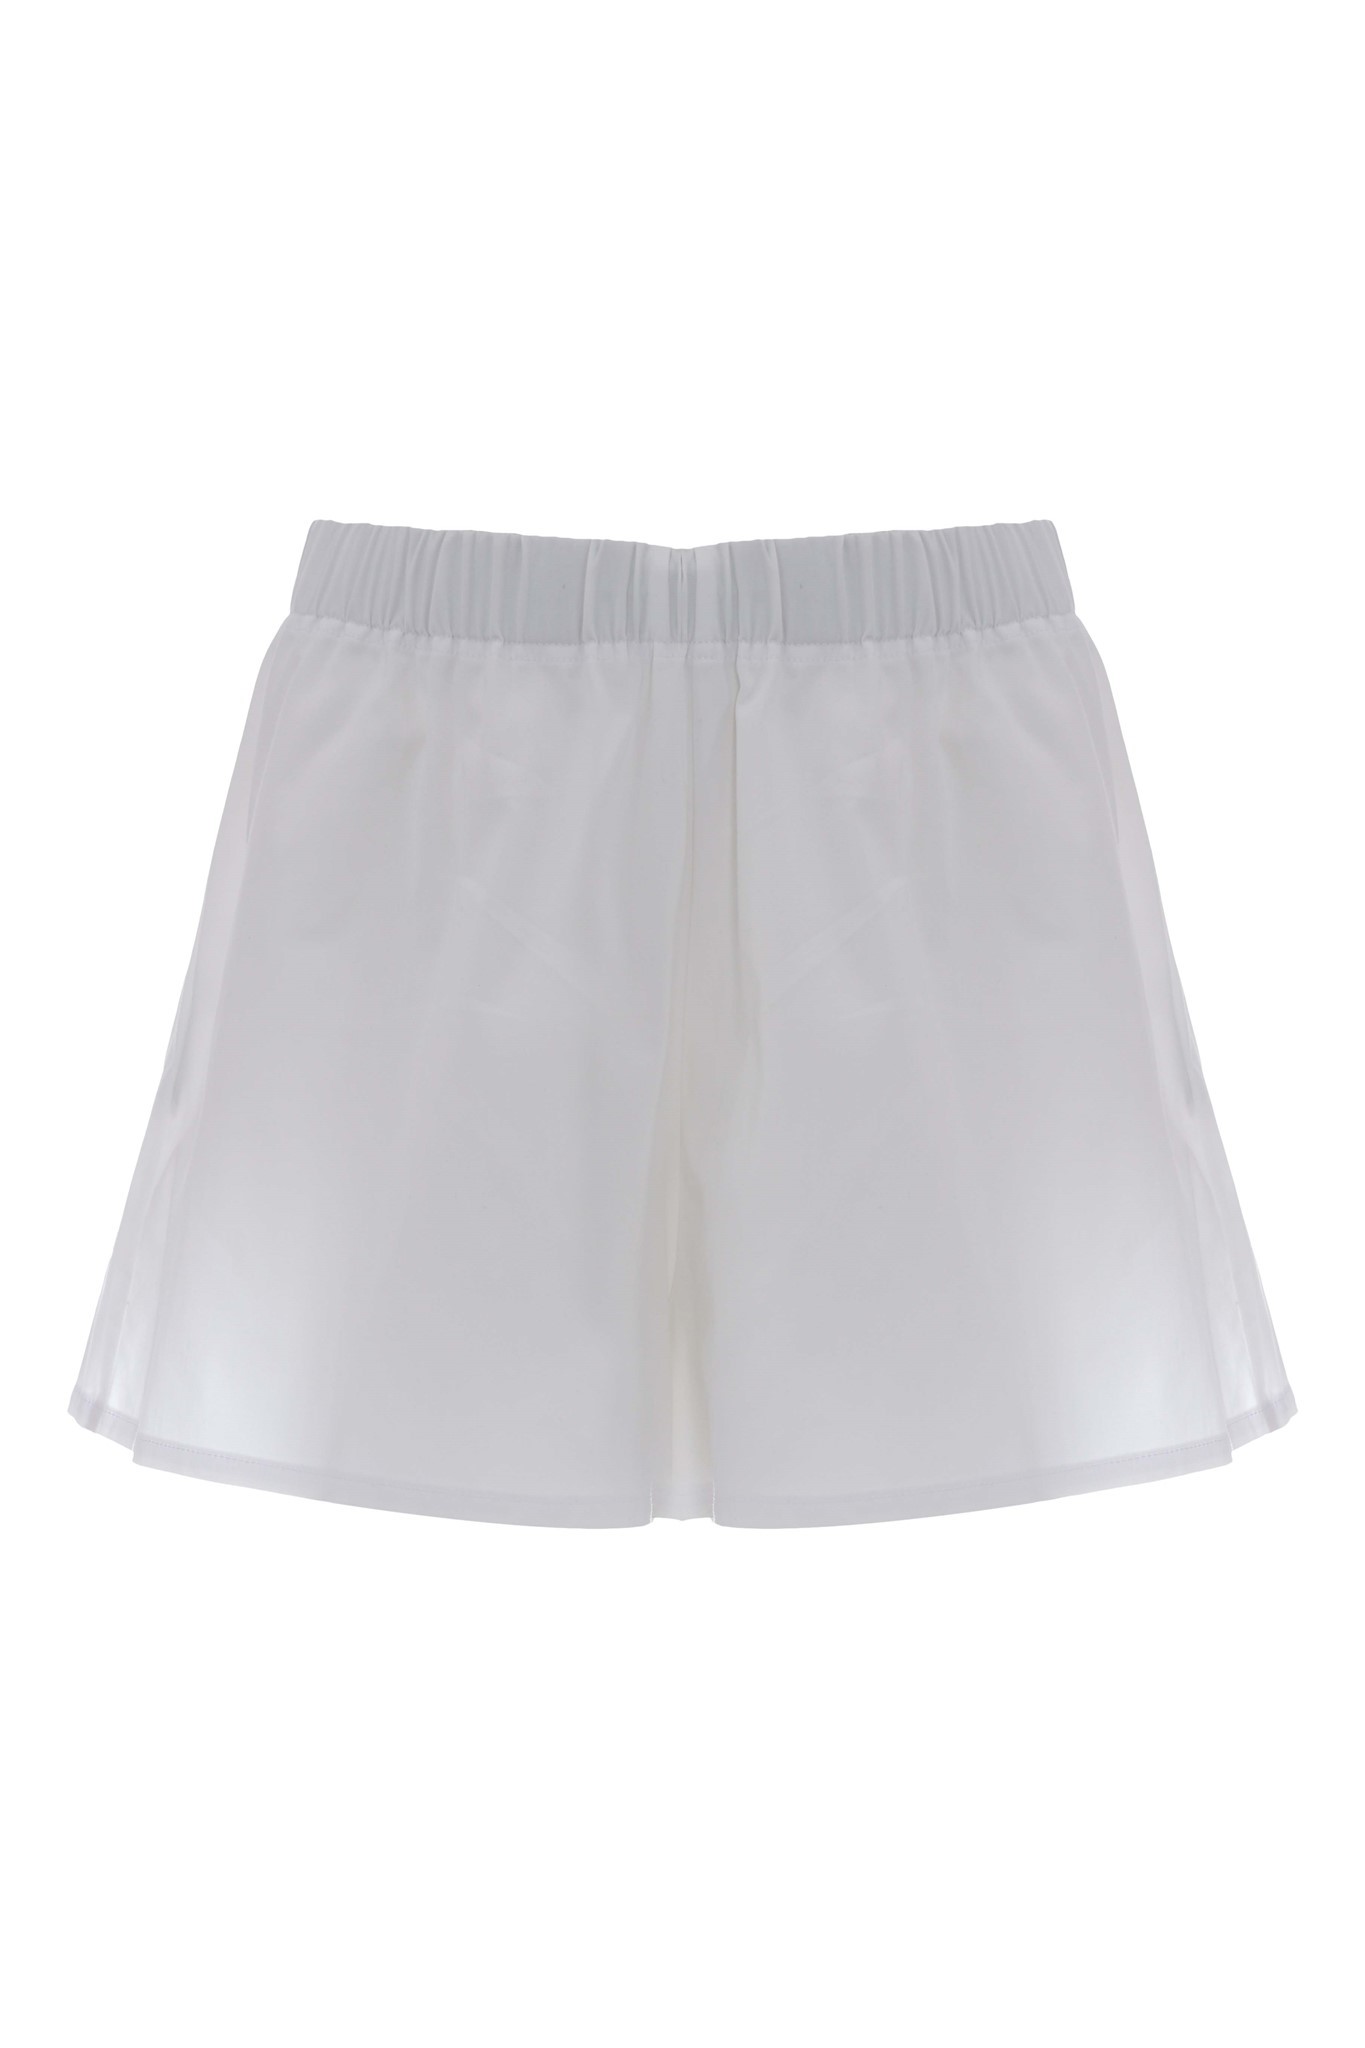 Picture of THALIA SHORTS